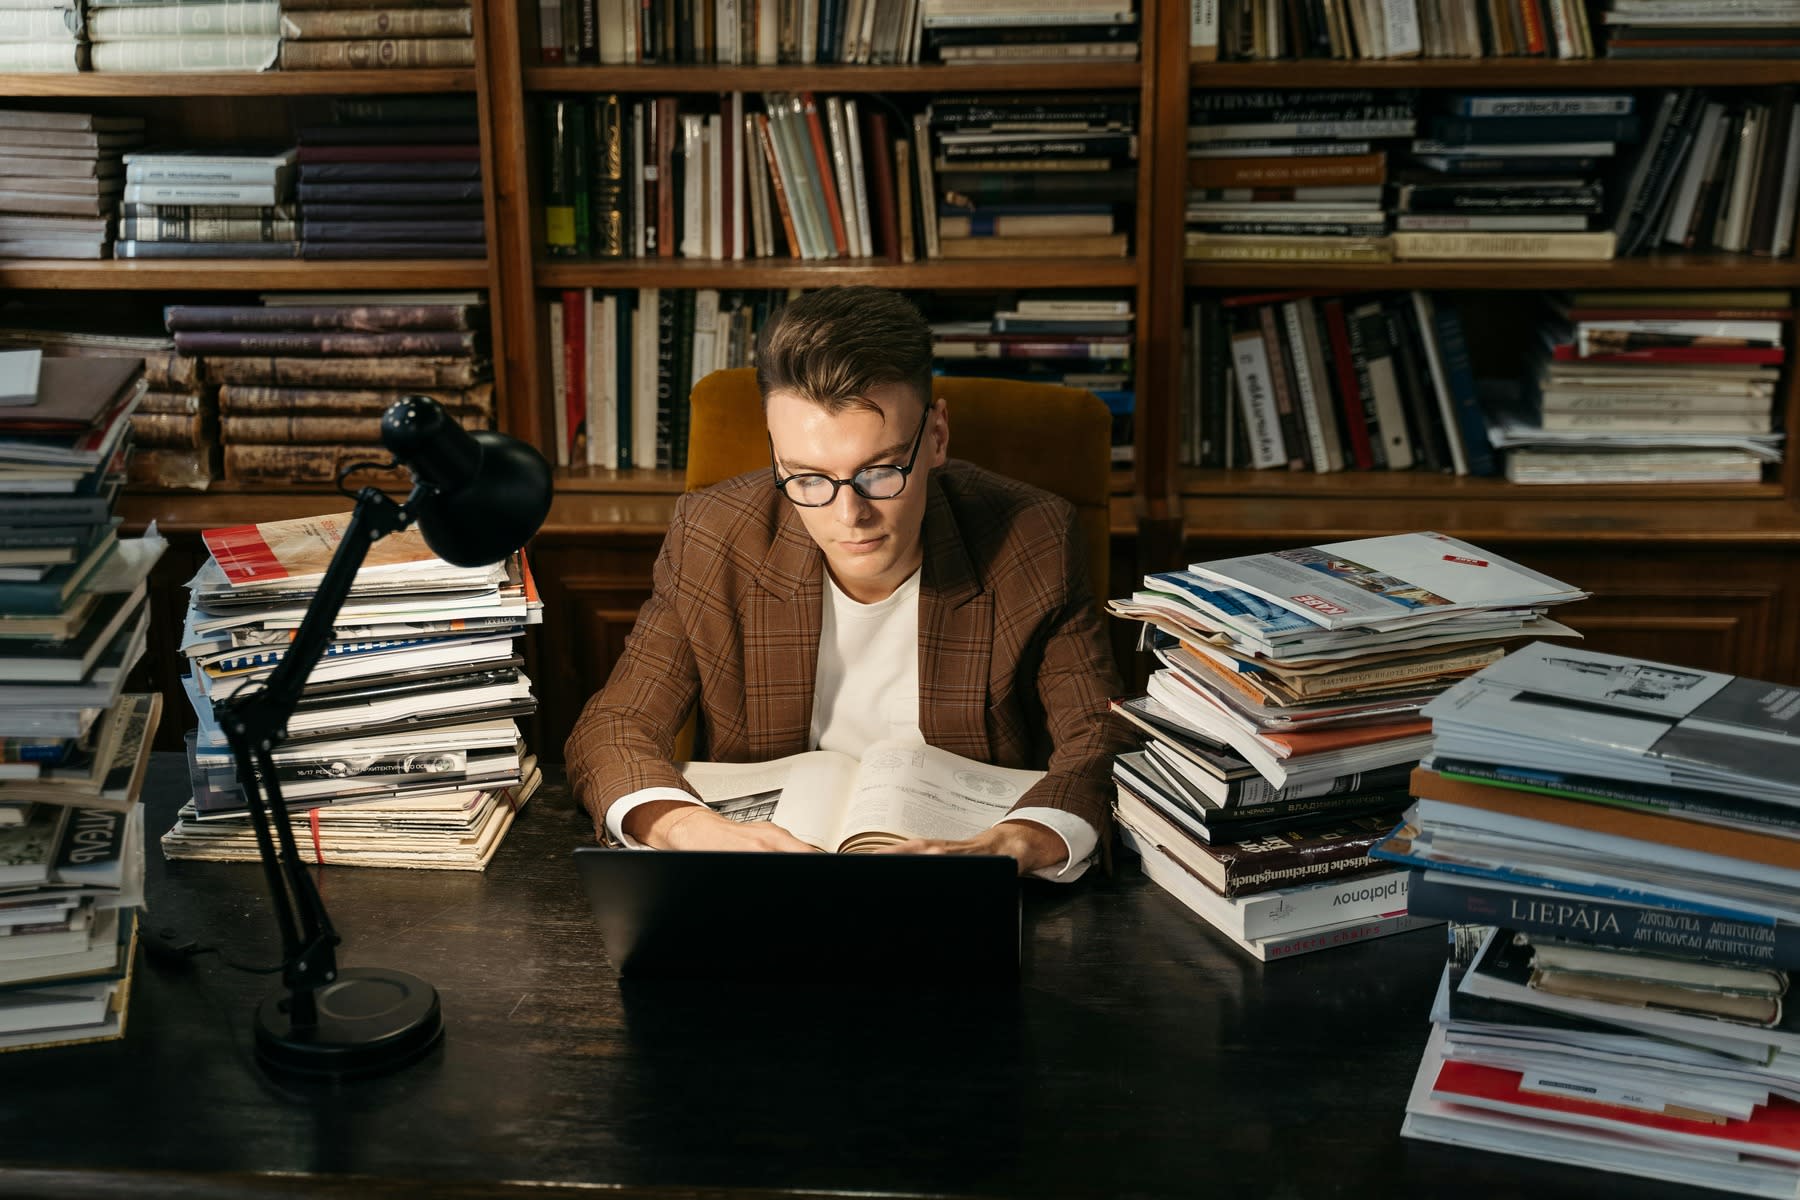 Man reading a book, while being surrounded by table full of books